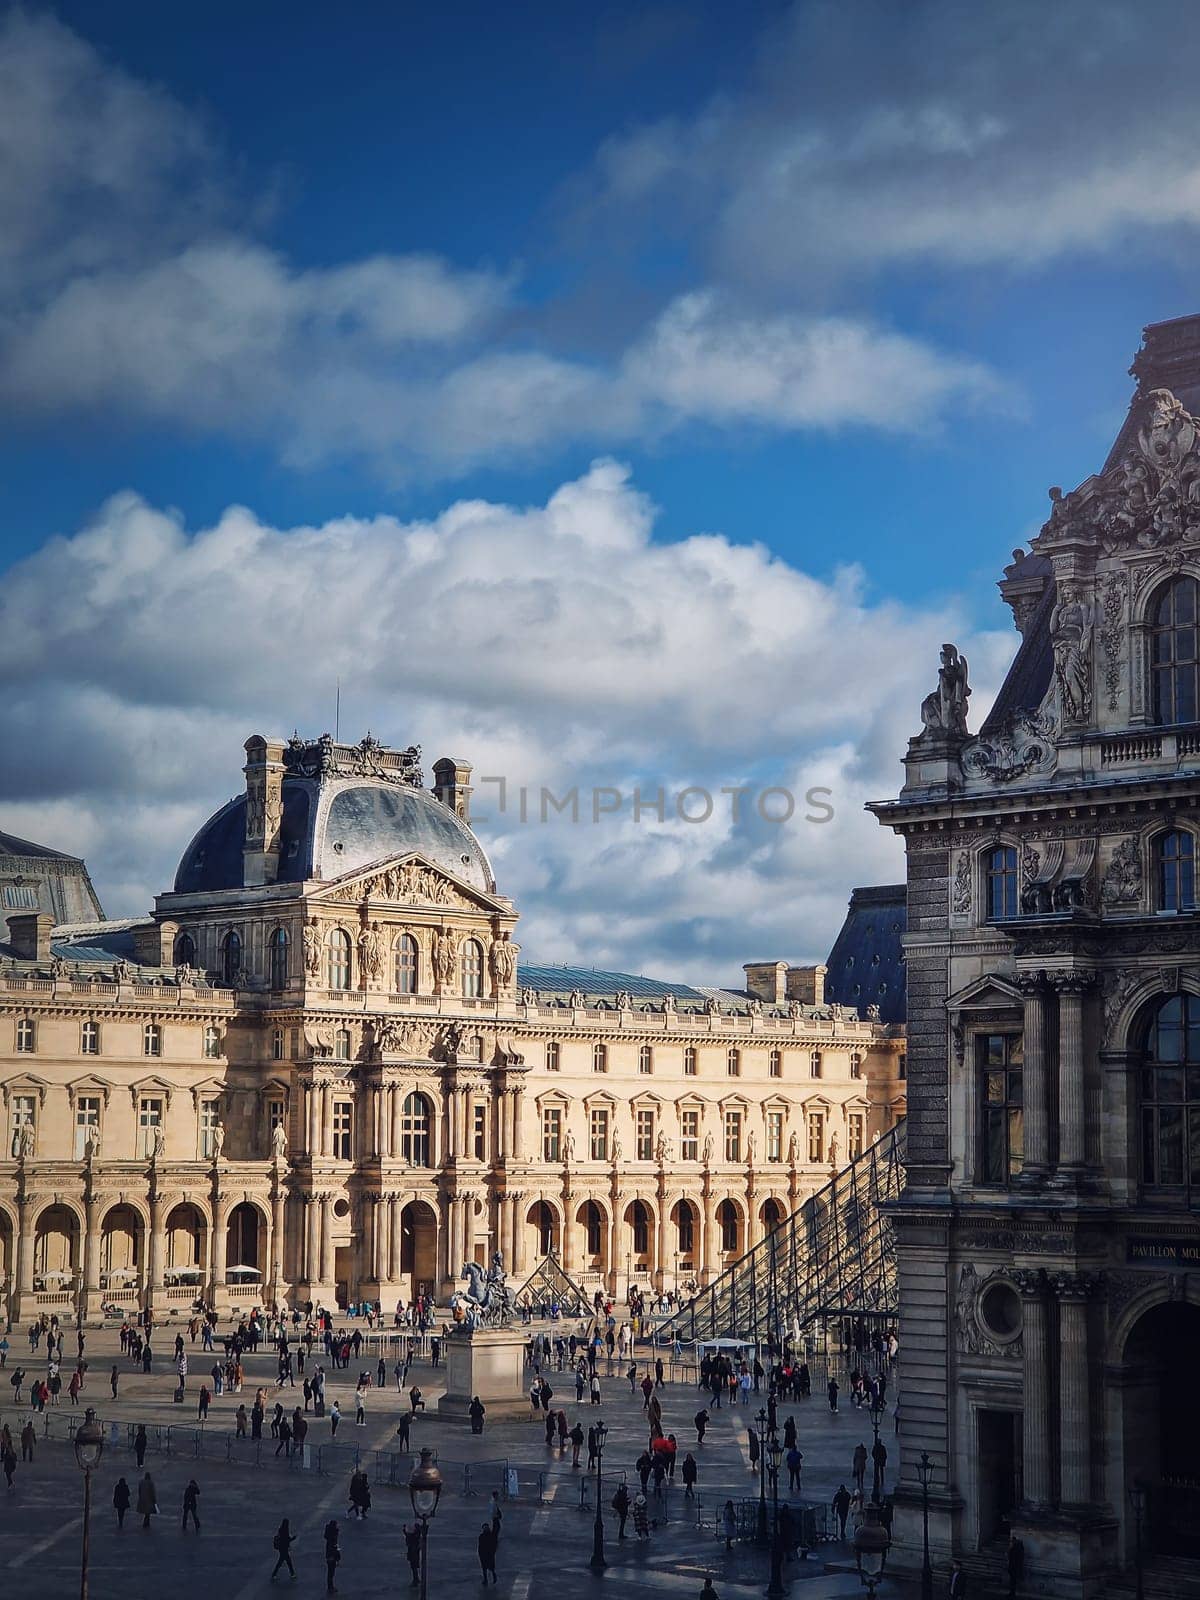 Louvre Museum territory, Paris, France. The famous palace site view vertical background by psychoshadow